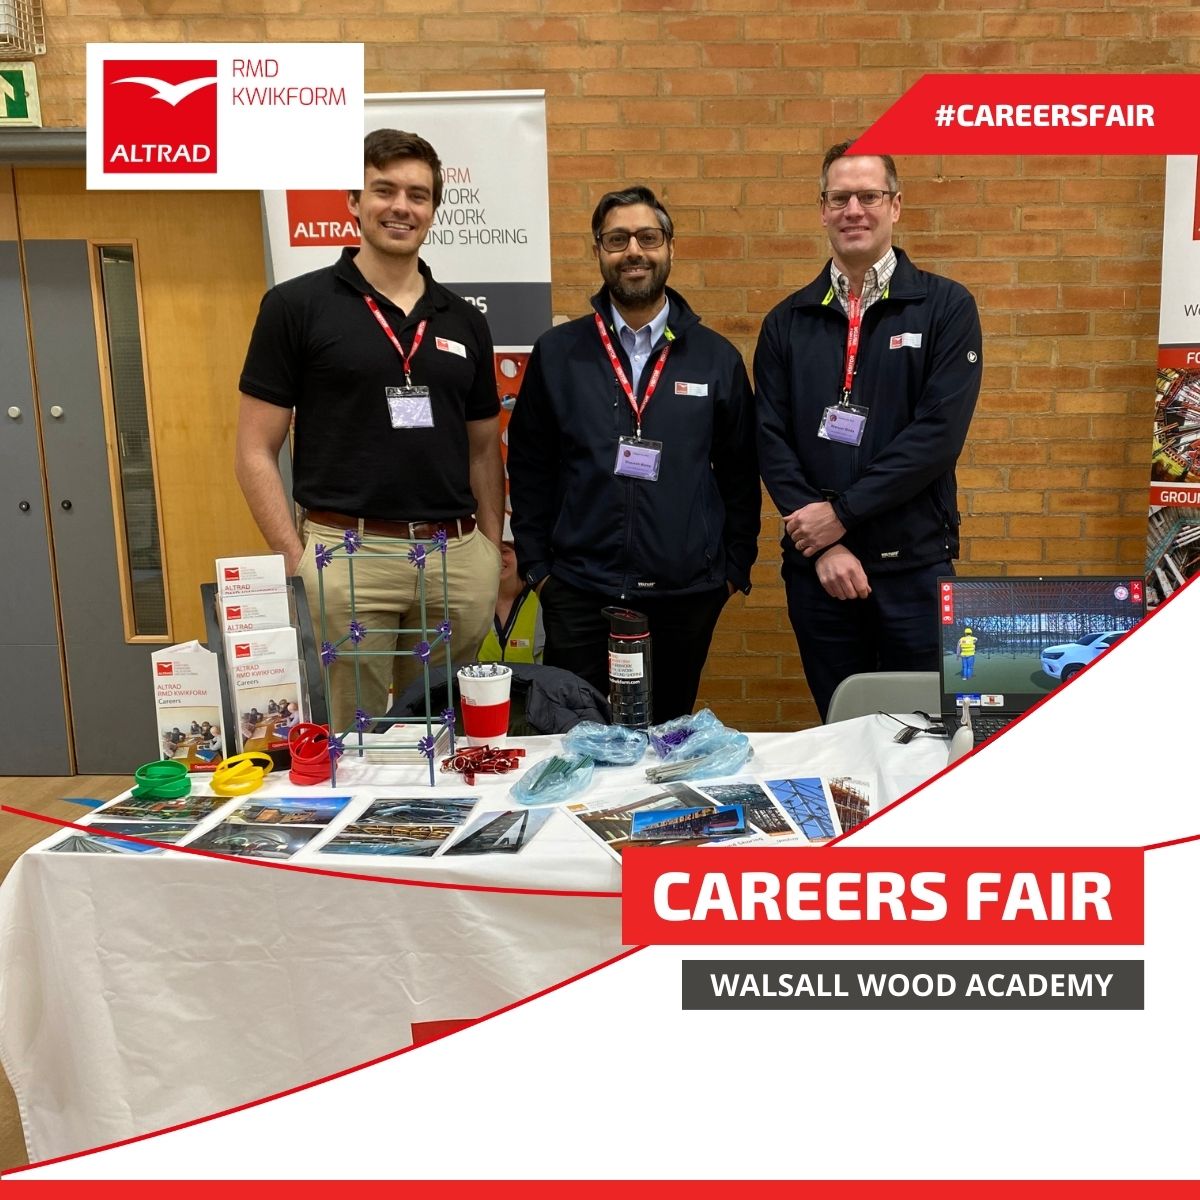 Exciting day at Walsall Academy’s Careers Fair! 

Our team connected with students from year 7 to 13, sparking their interest in construction and the world of work.

Huge thanks to @Walsall_ Academy for hosting this fantastic event!

#Construction #CareersInConstruction